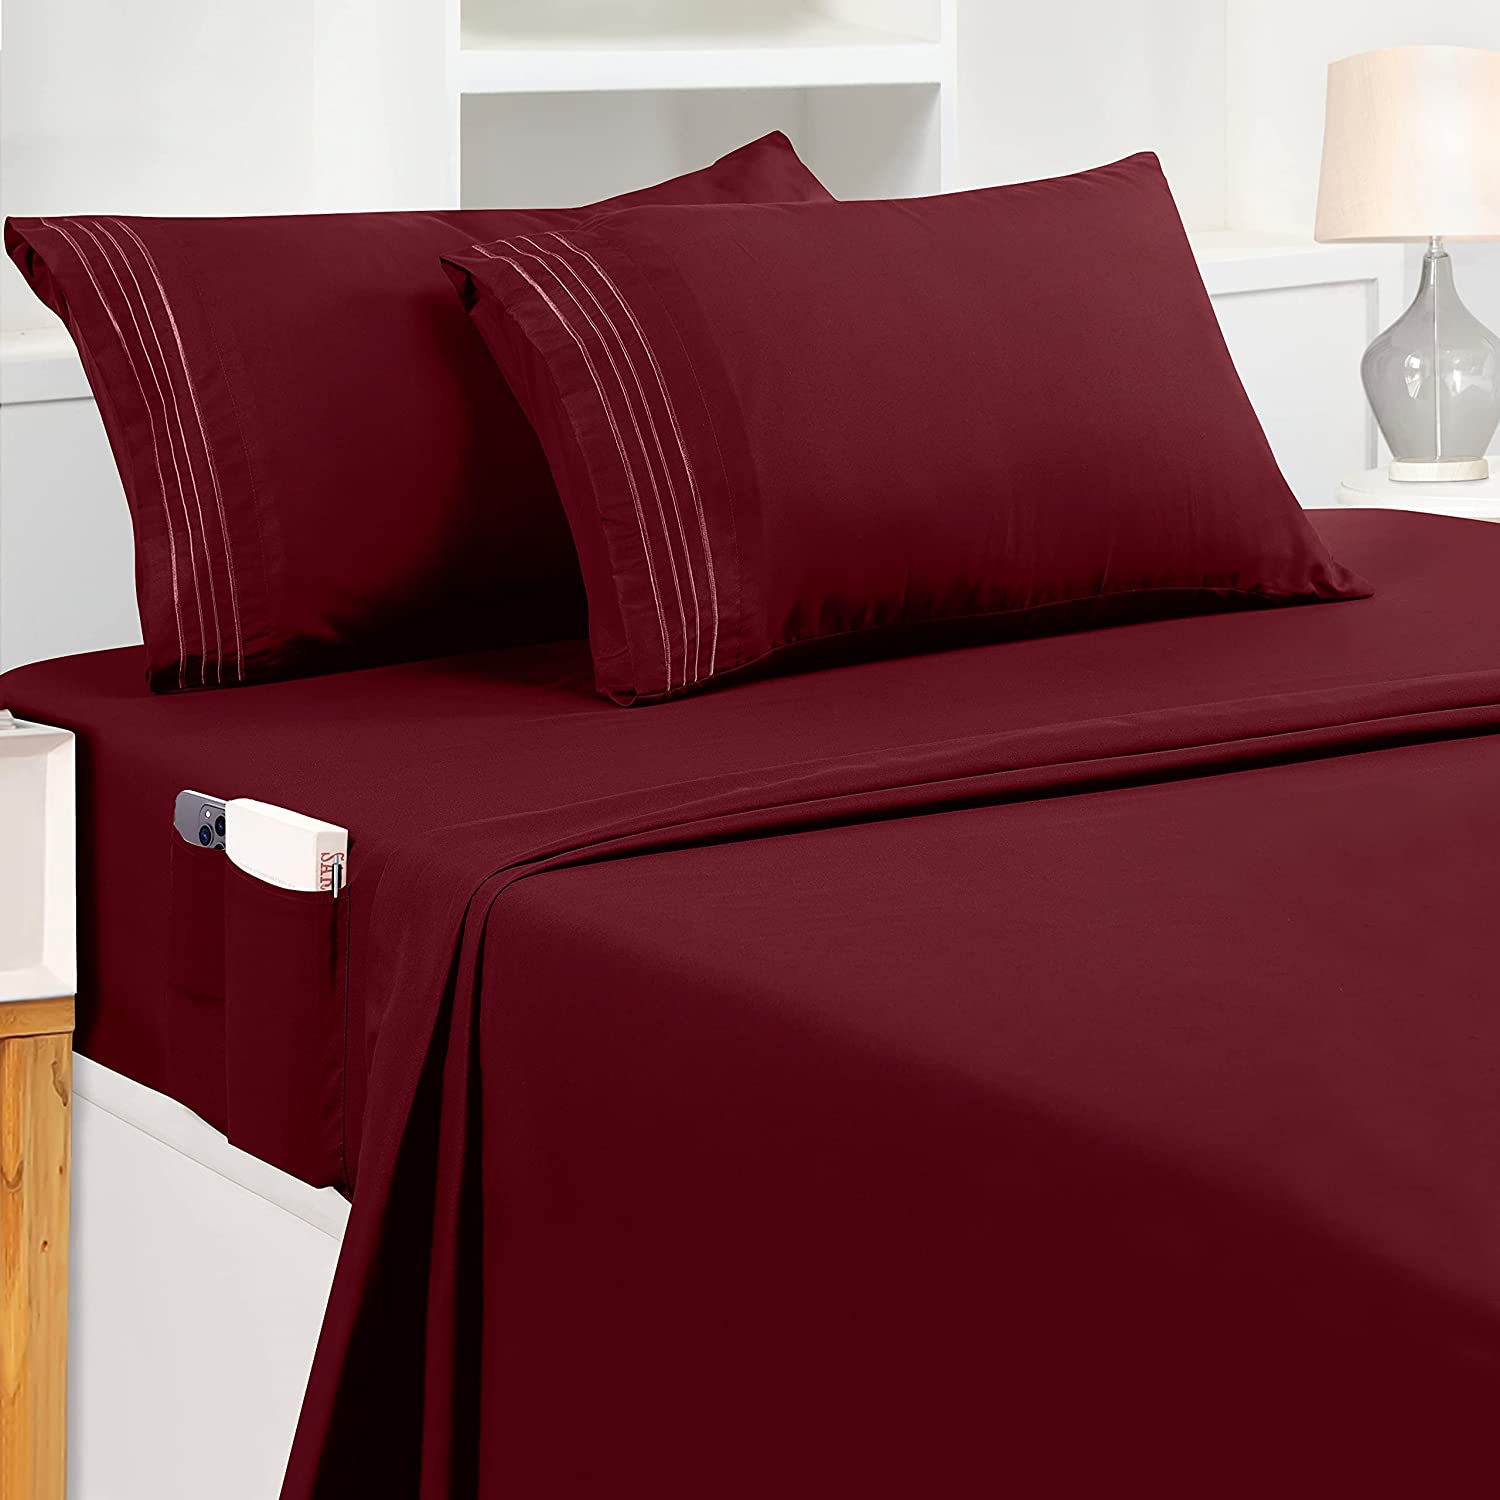 Utopia Bedding Queen Sheet Set – Soft Microfiber 4 Piece Luxury Bed Sheets  with